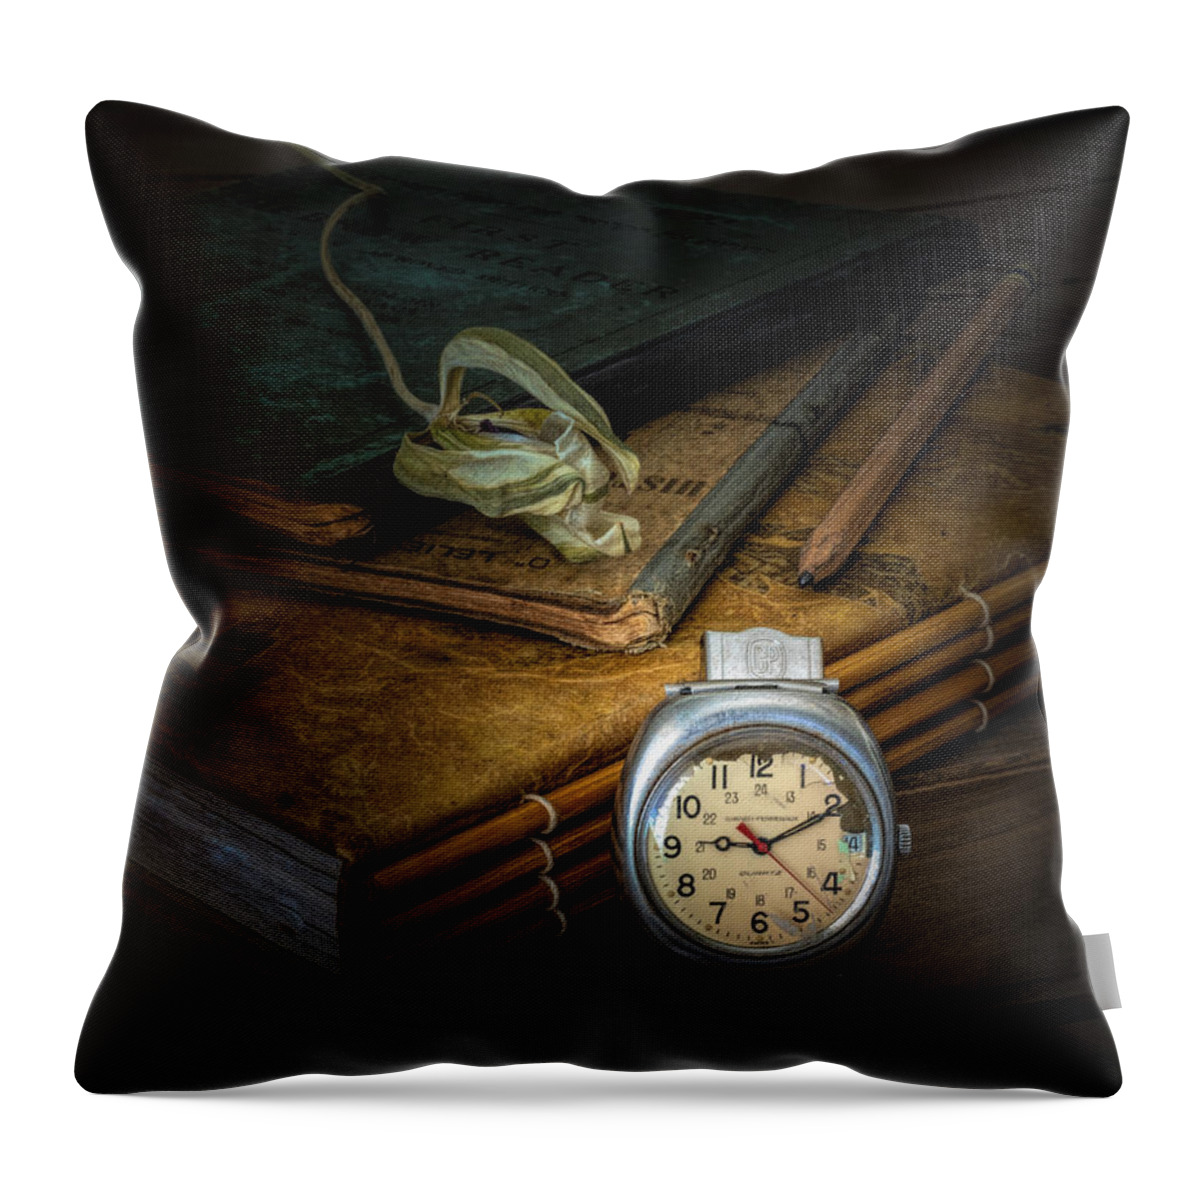 Still Life Throw Pillow featuring the photograph Ten minutes past the hour by Alessandra RC